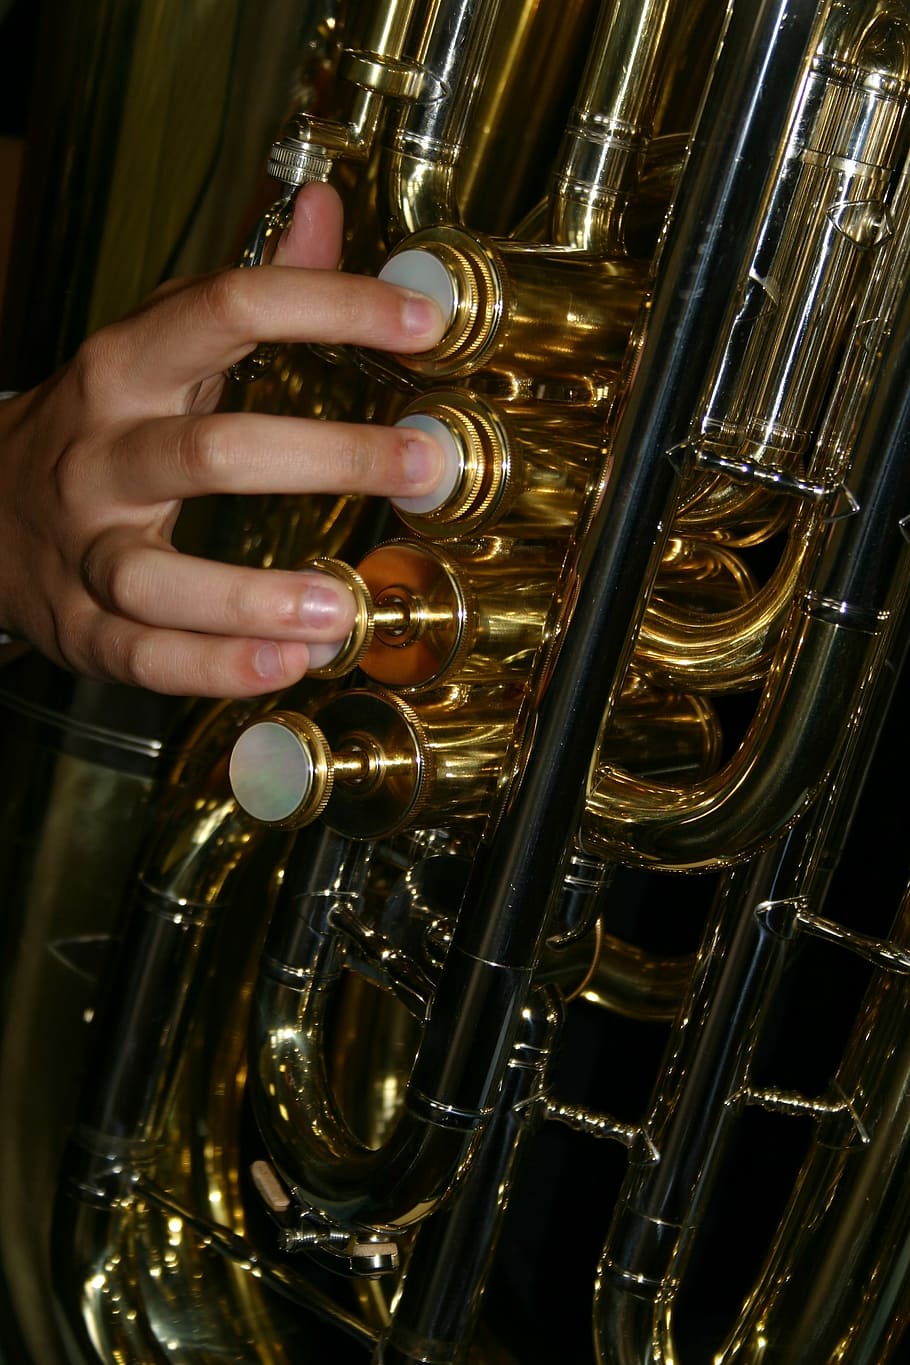 tuba, copper, piston, music, musical instrument, arts culture and entertainment, brass, human hand, musical equipment, playing